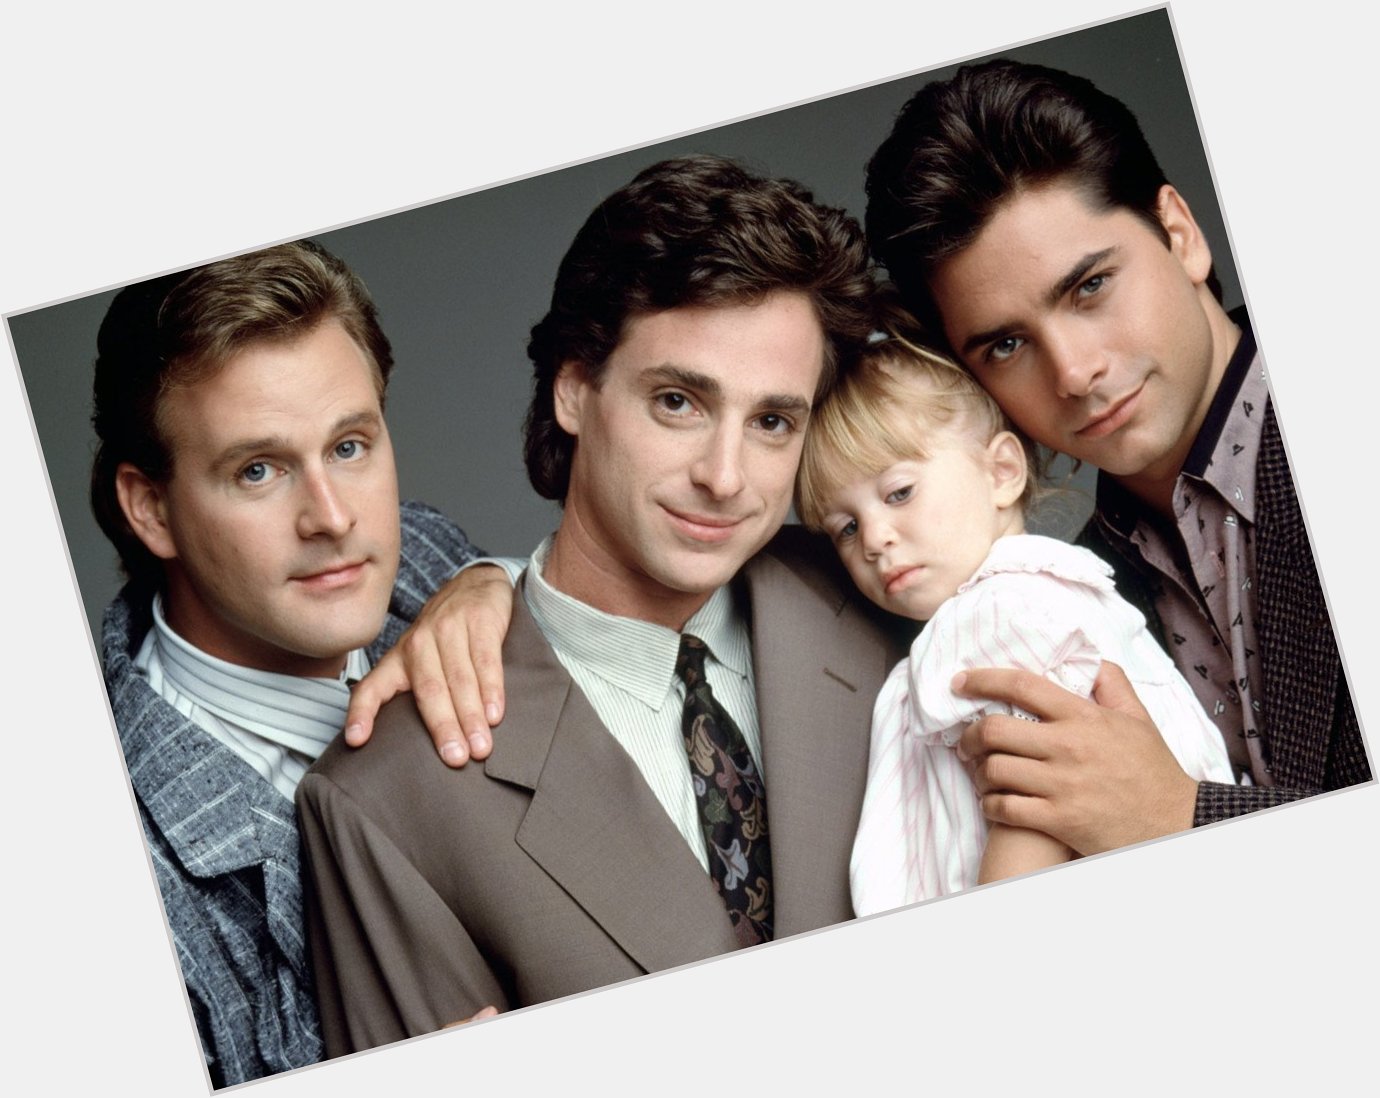 Happy Birthday to Bob Saget(middle) who turns 61 today! 